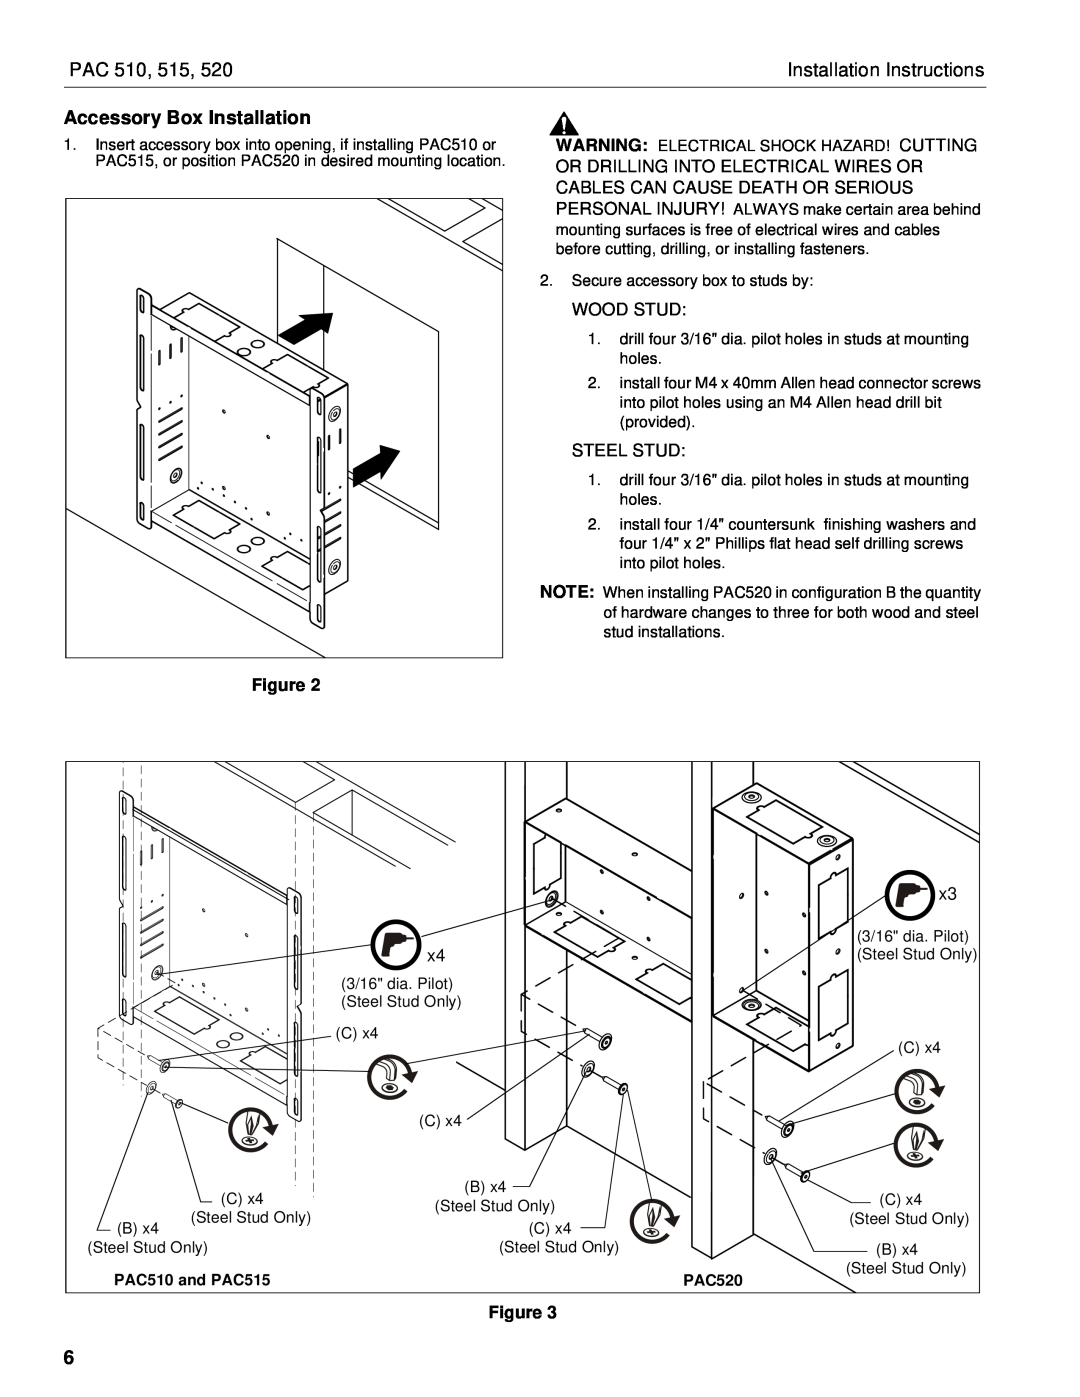 Chief Manufacturing PAC510 Accessory Box Installation, PAC 510, Installation Instructions, Wood Stud, Steel Stud 